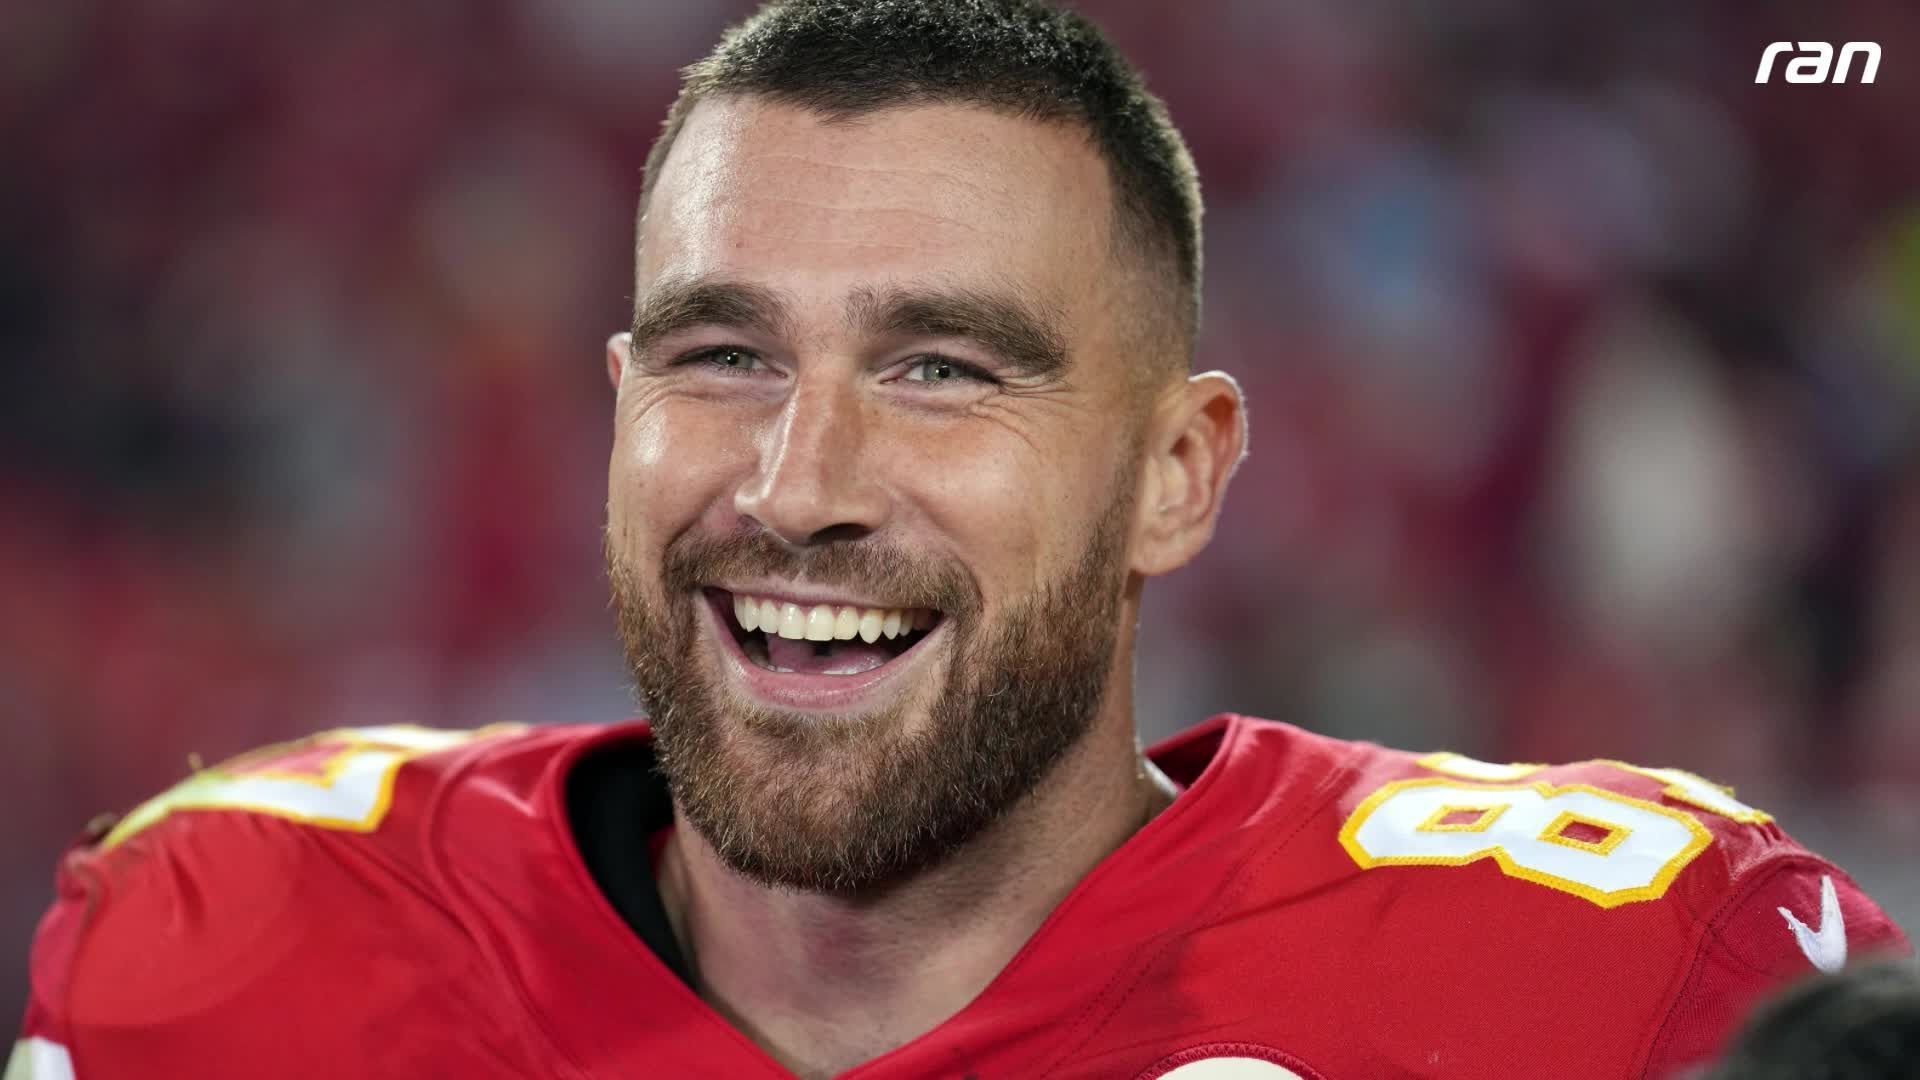 Chiefs extend with Kelce: “More Taylor Swift!”